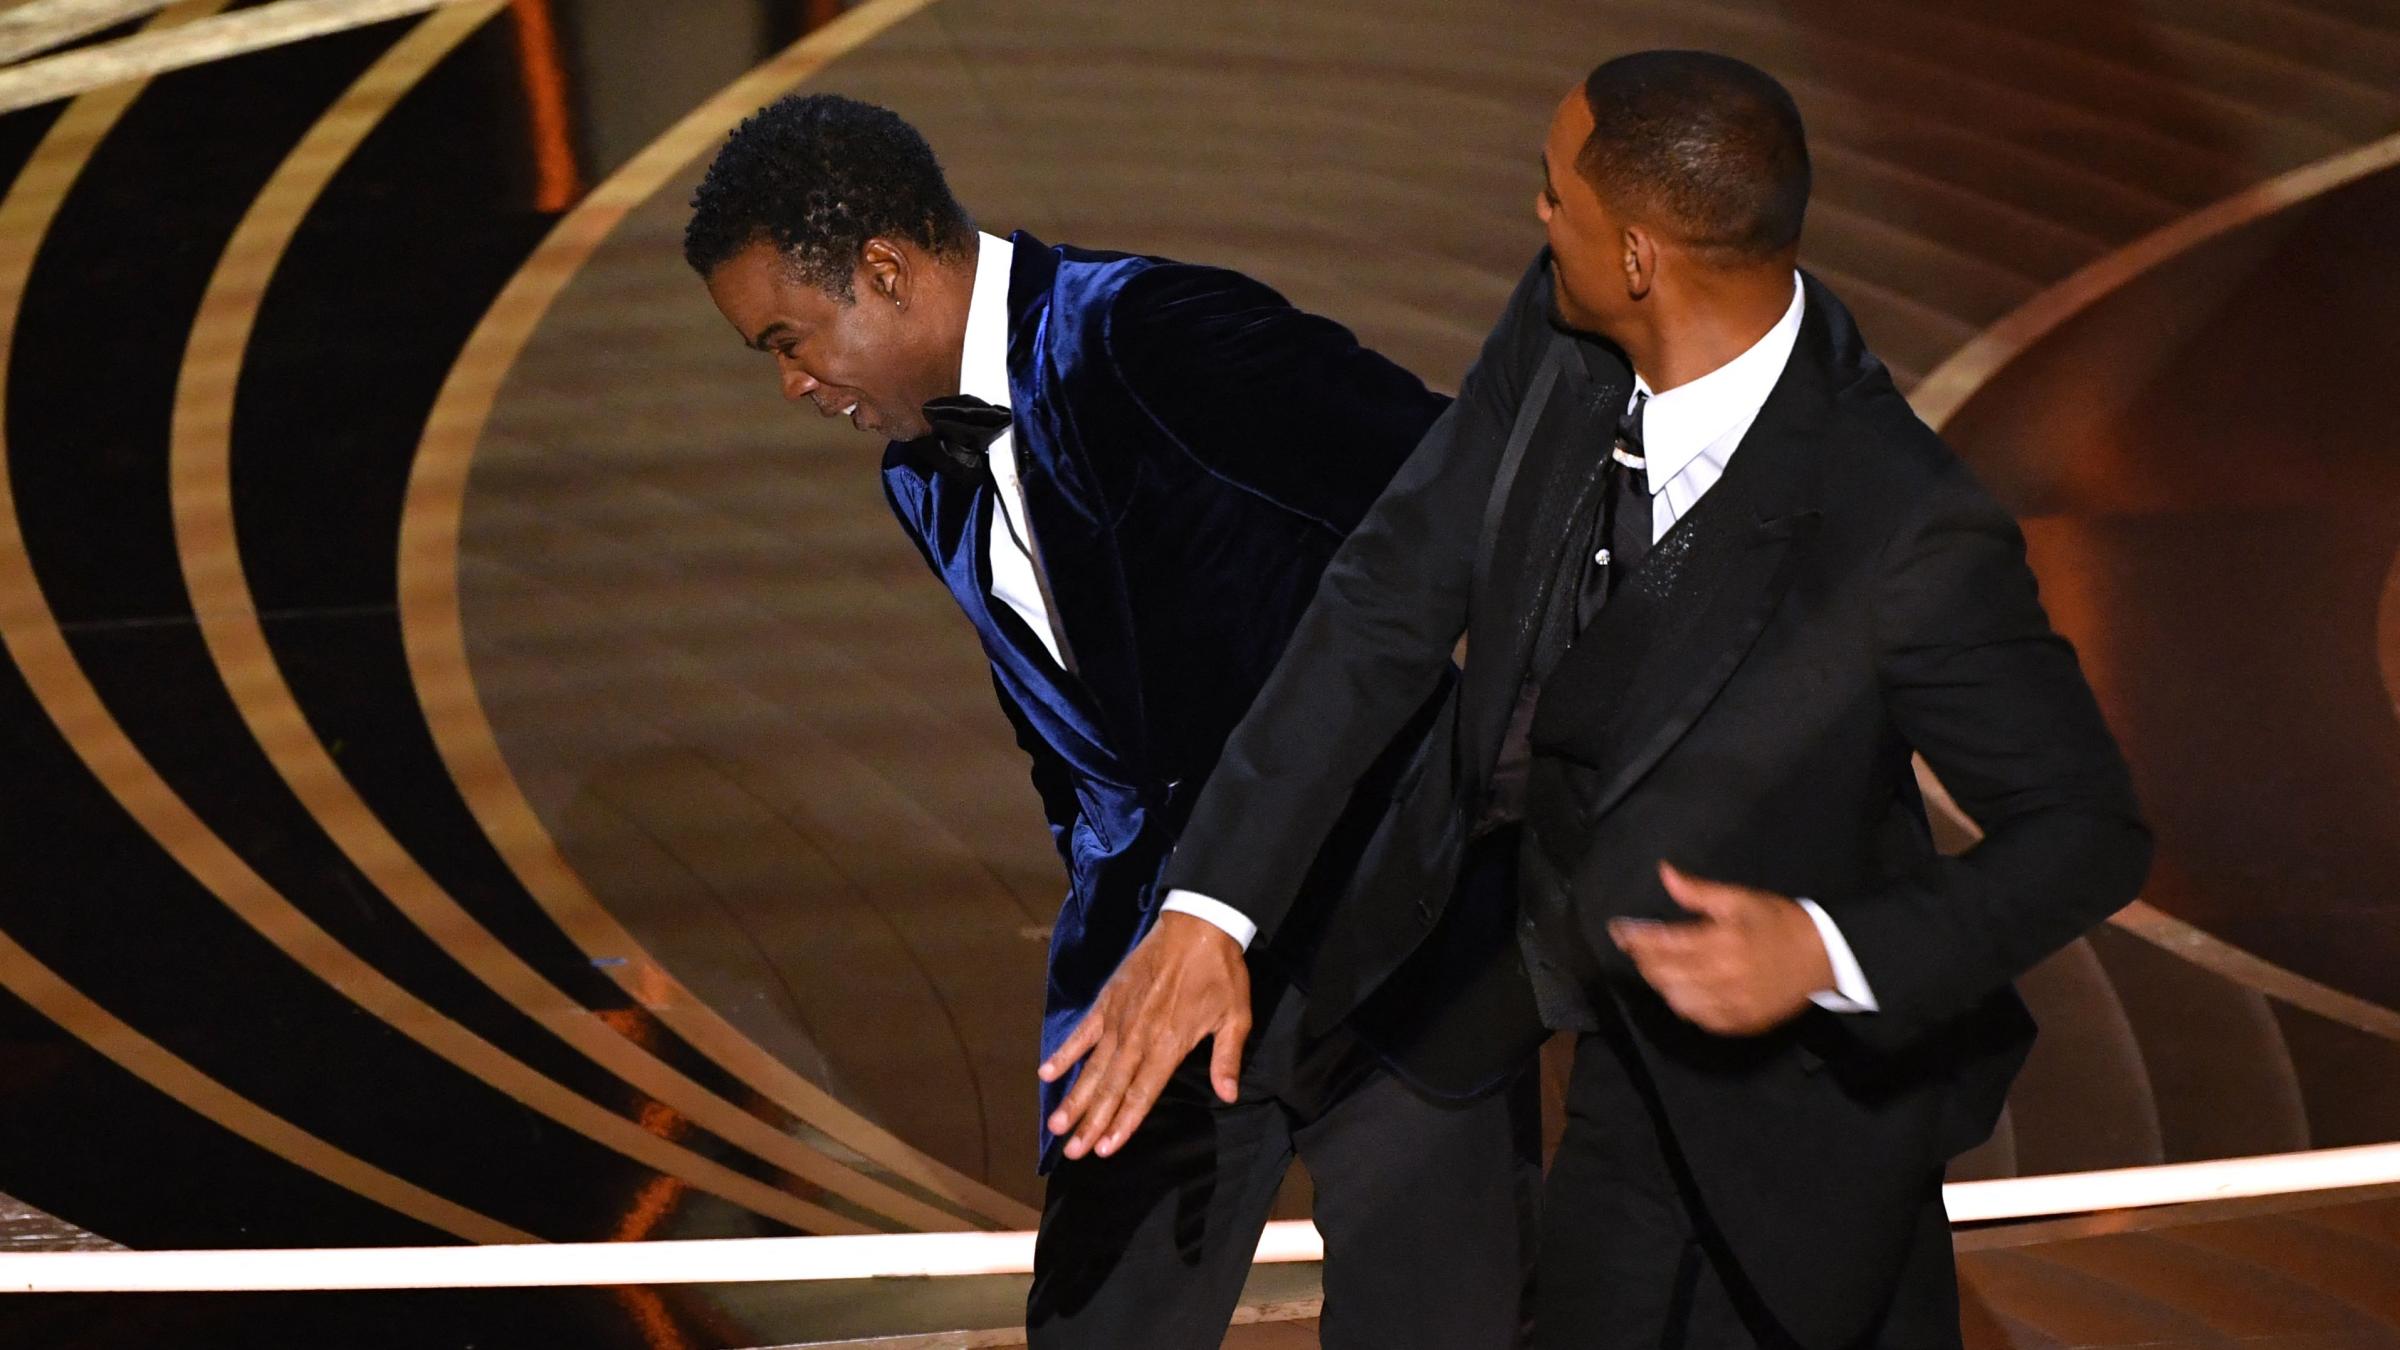 "Keep My Wifes Name Out Of Your Fking Mouth!" Will Smith Hits Chris ...